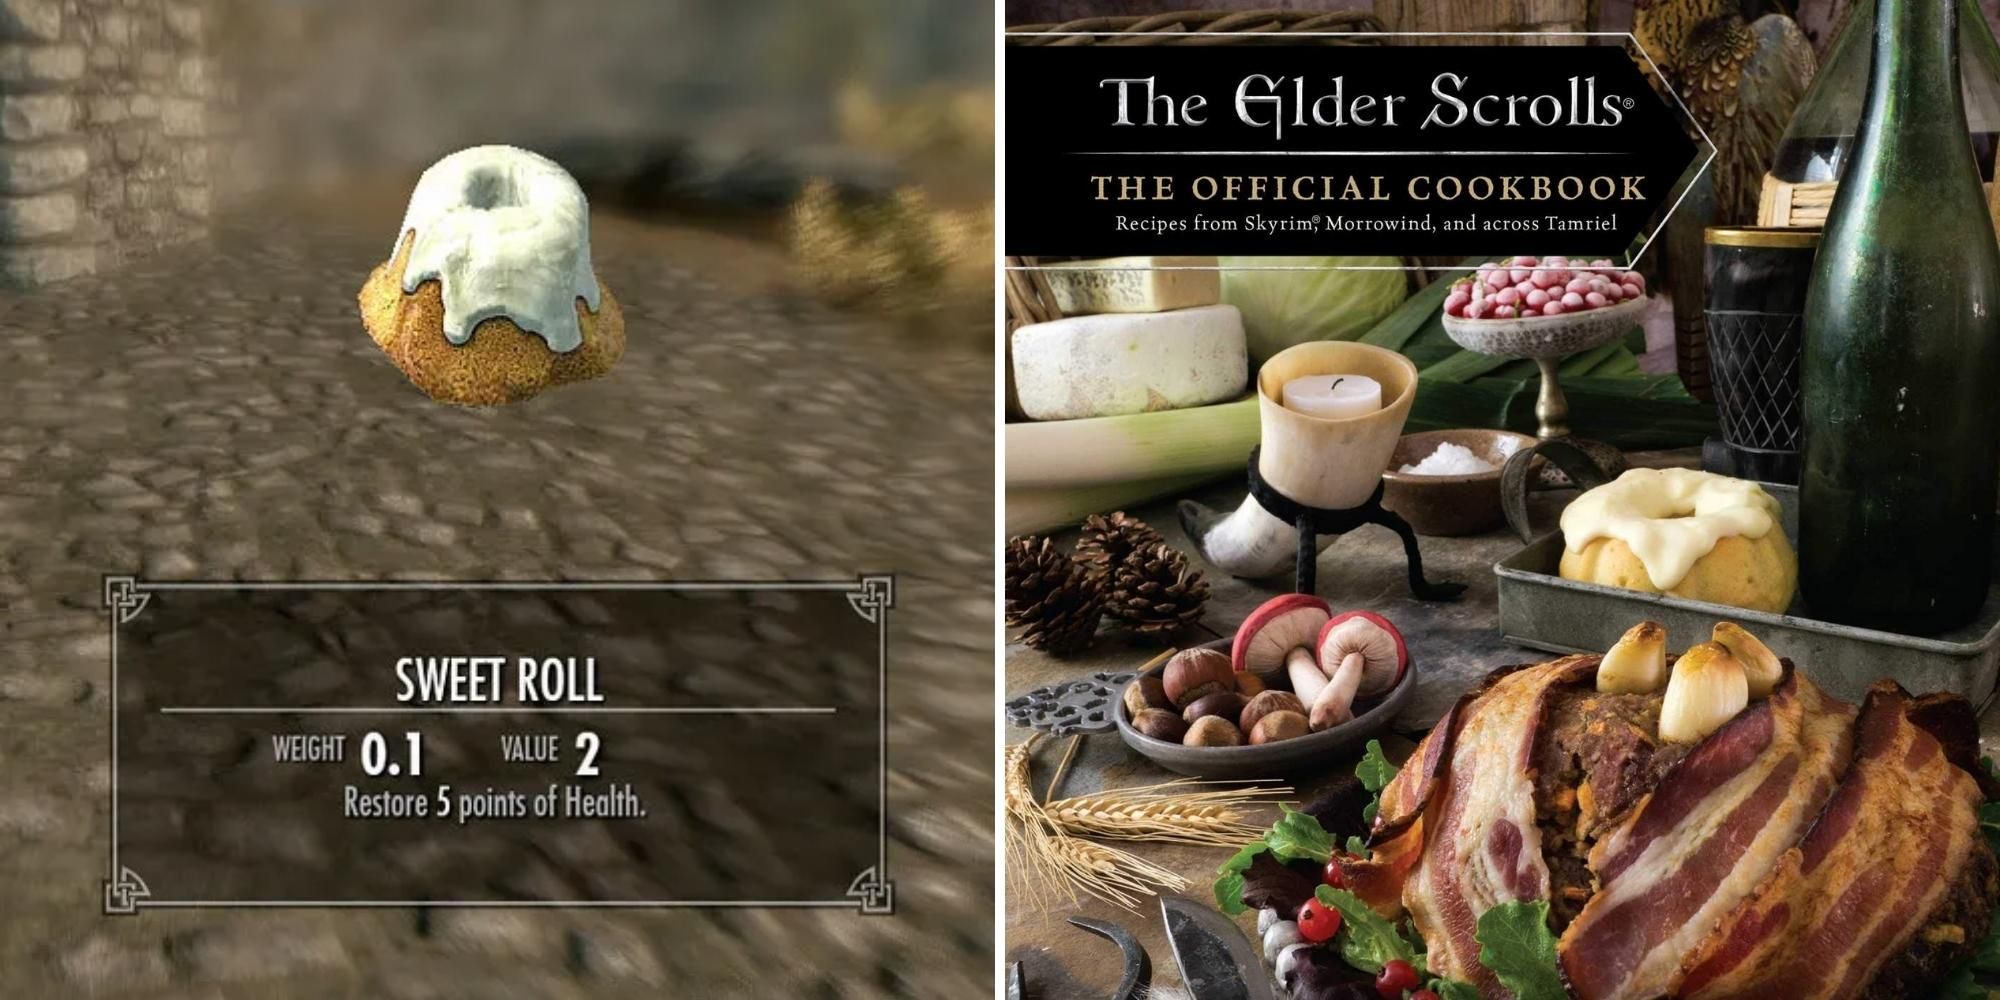 Sweet Roll in Skyrim and The Elder Scrolls Official Cookbook